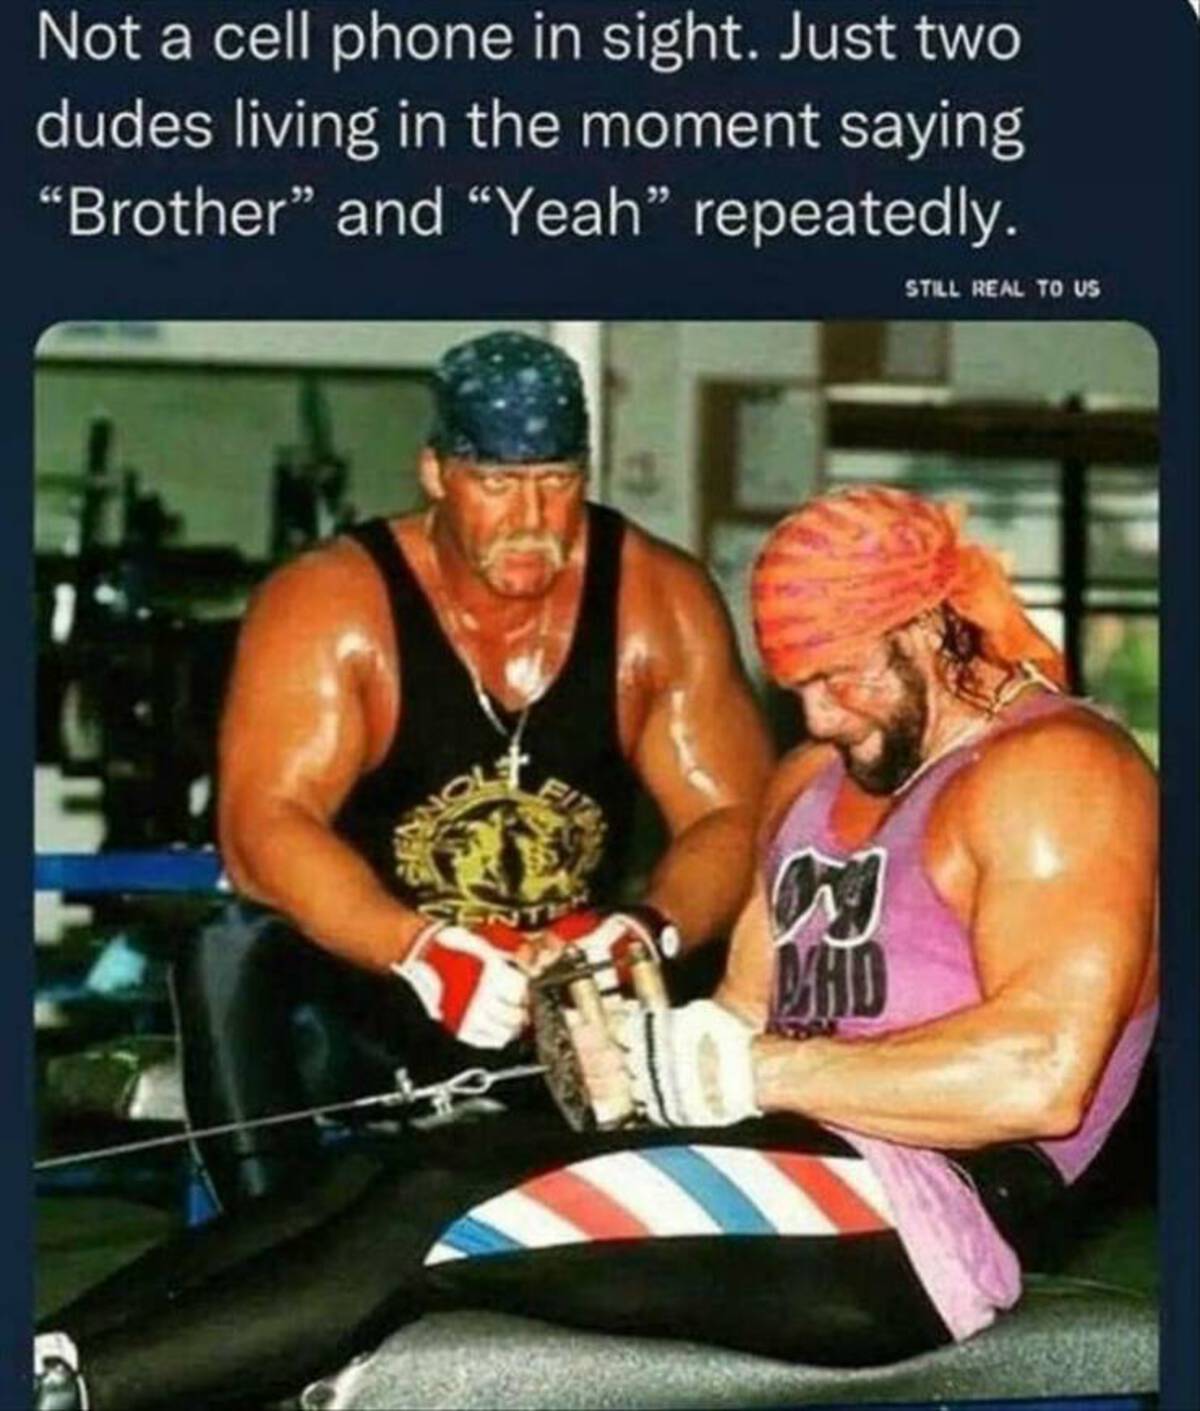 bodybuilder - Not a cell phone in sight. Just two dudes living in the moment saying "Brother" and "Yeah" repeatedly. t Ent W Mhd Still Real To Us